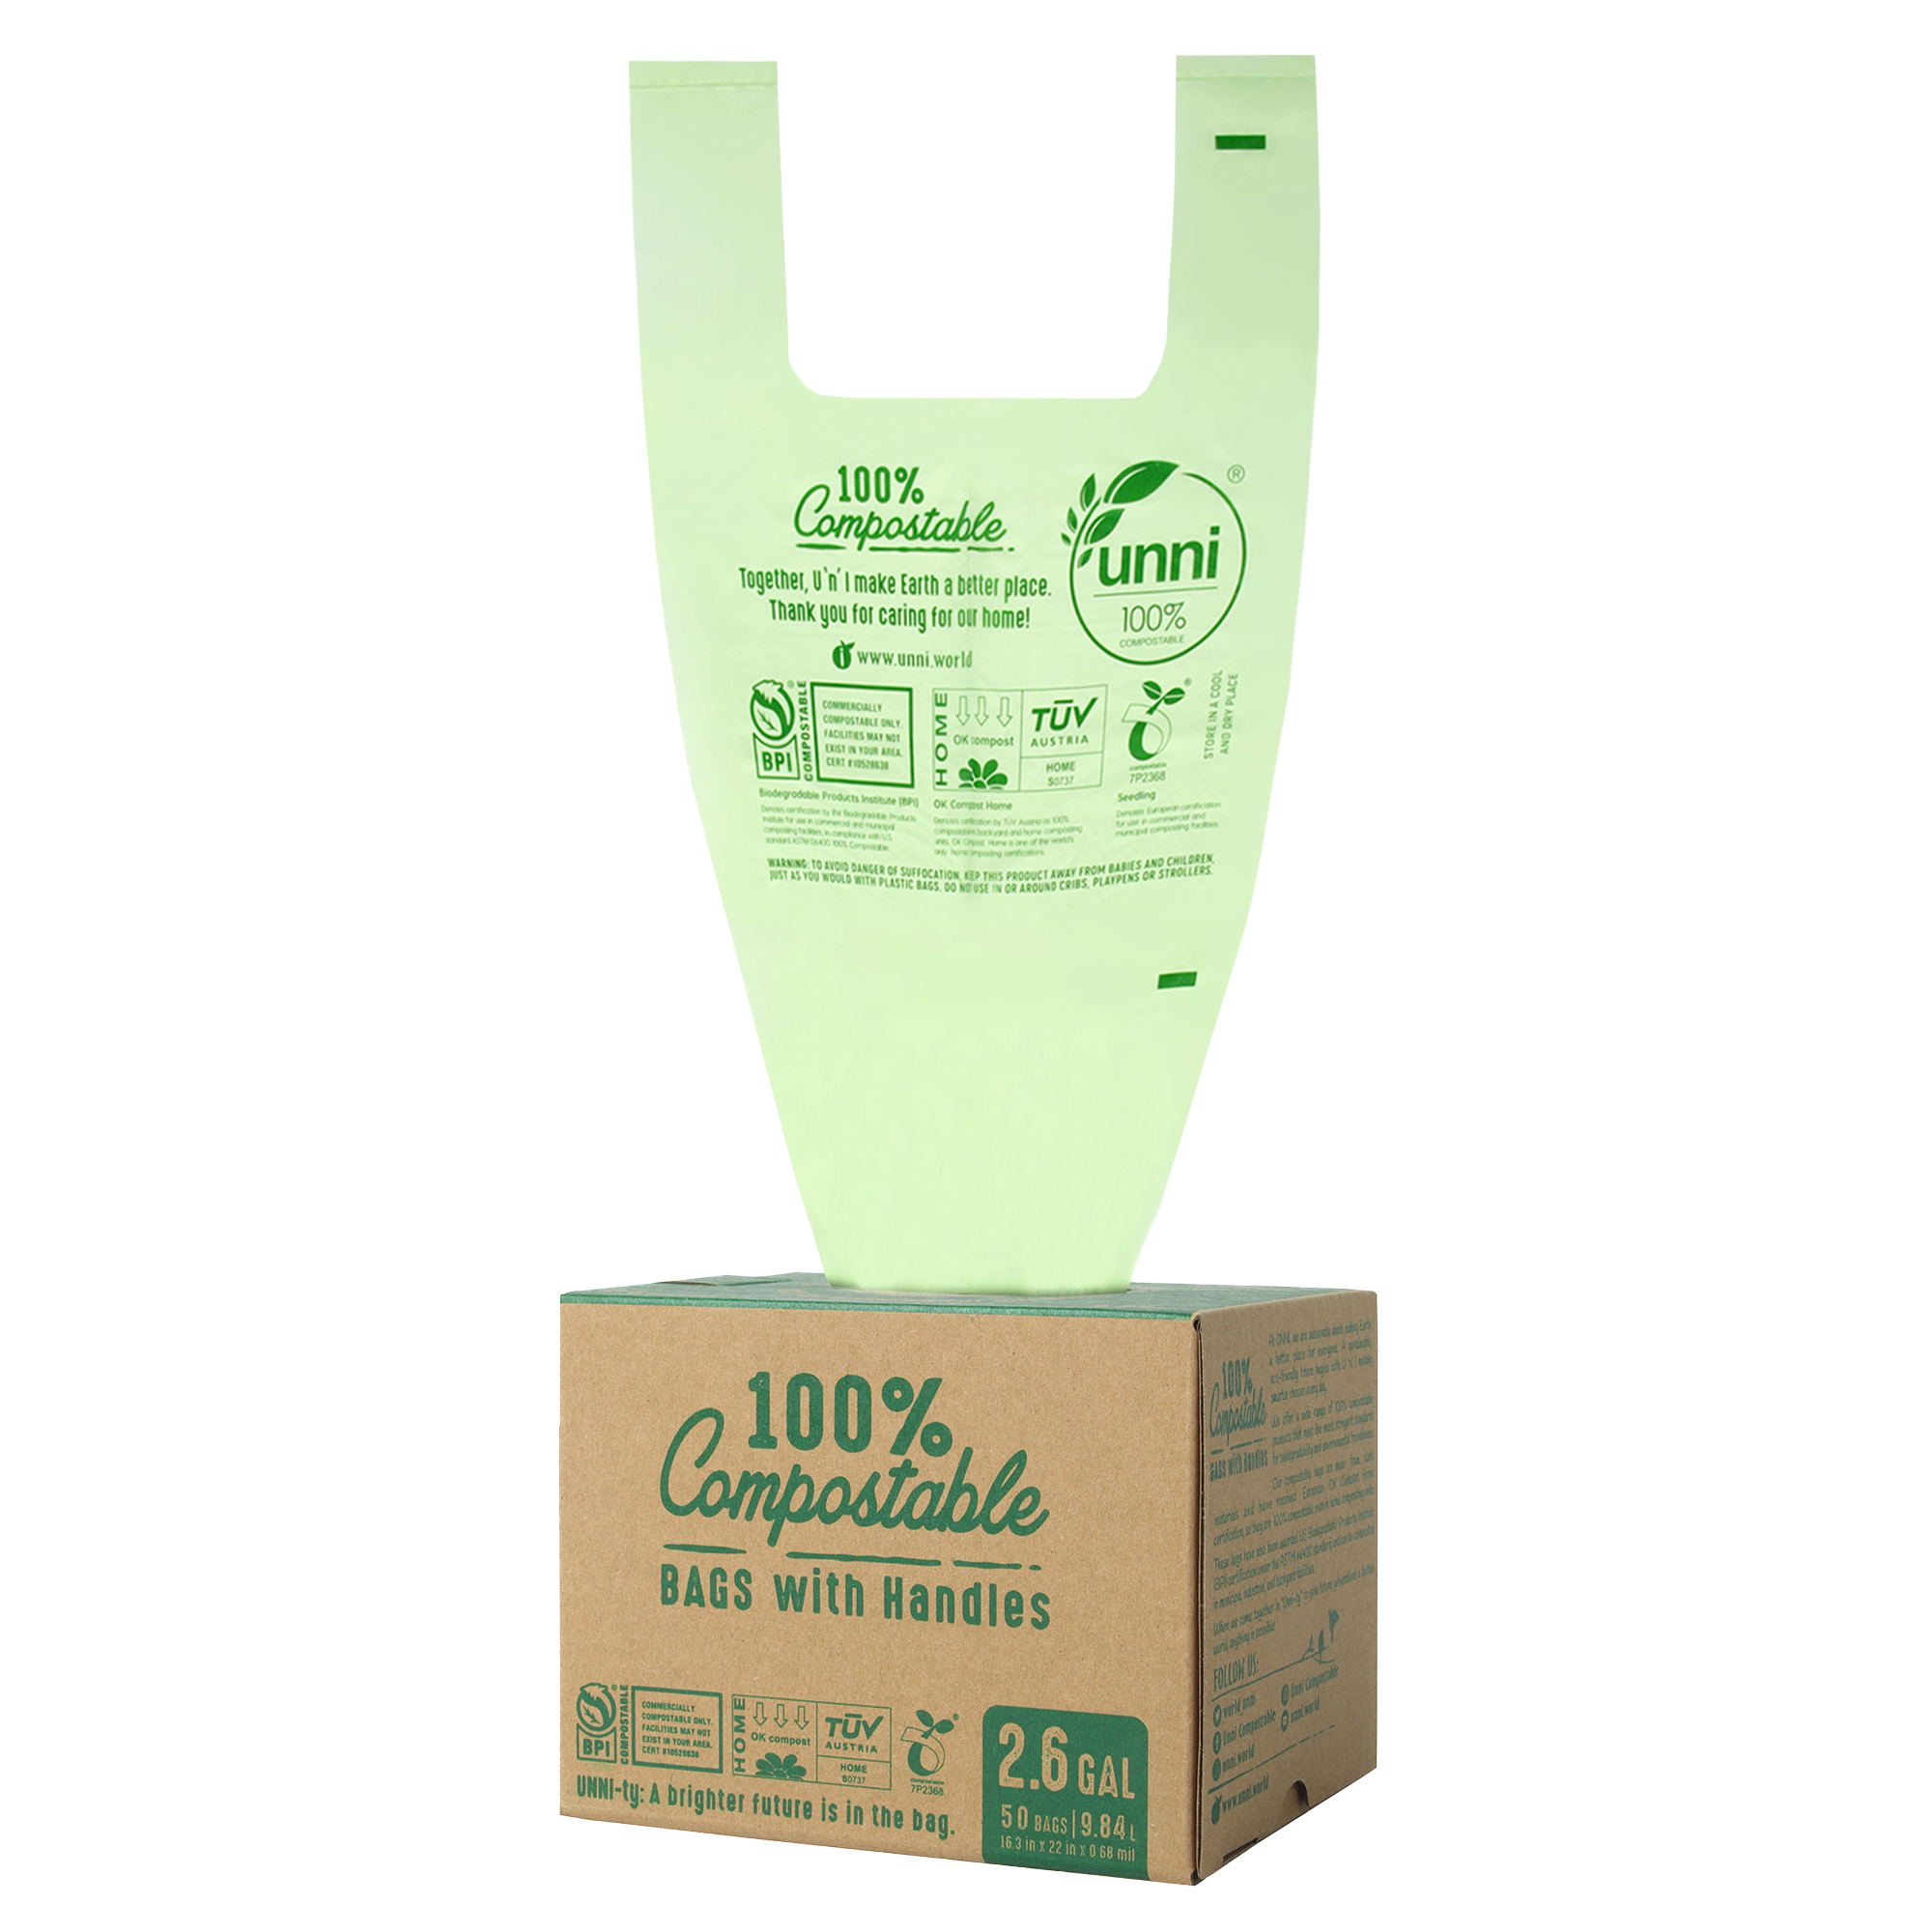 2.6 Gallon, 9.84 Liter, Compostable Bags with Handles